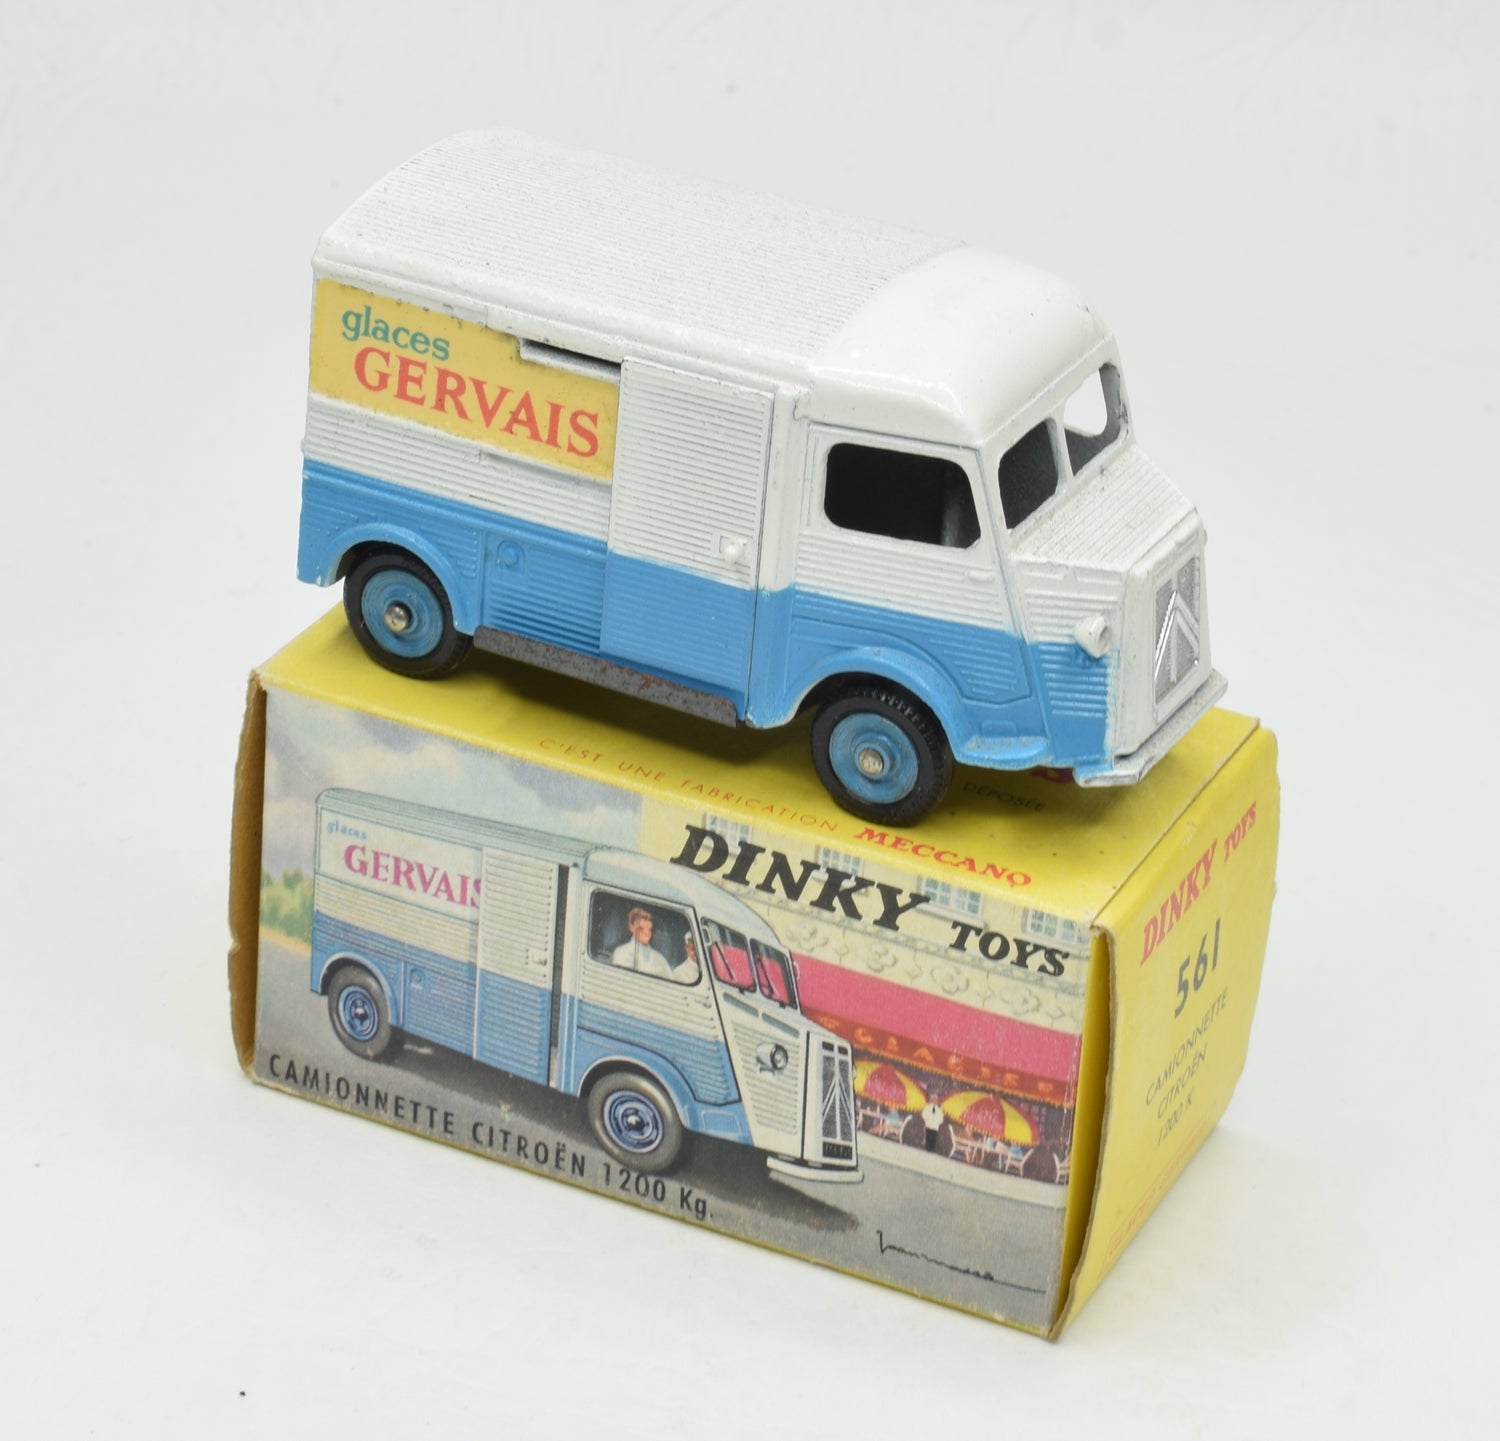 French Dinky Toys 561 Camionette 'Glaces Gervais' Very Near Mint/Boxed  'Brecon' Collection Part 2